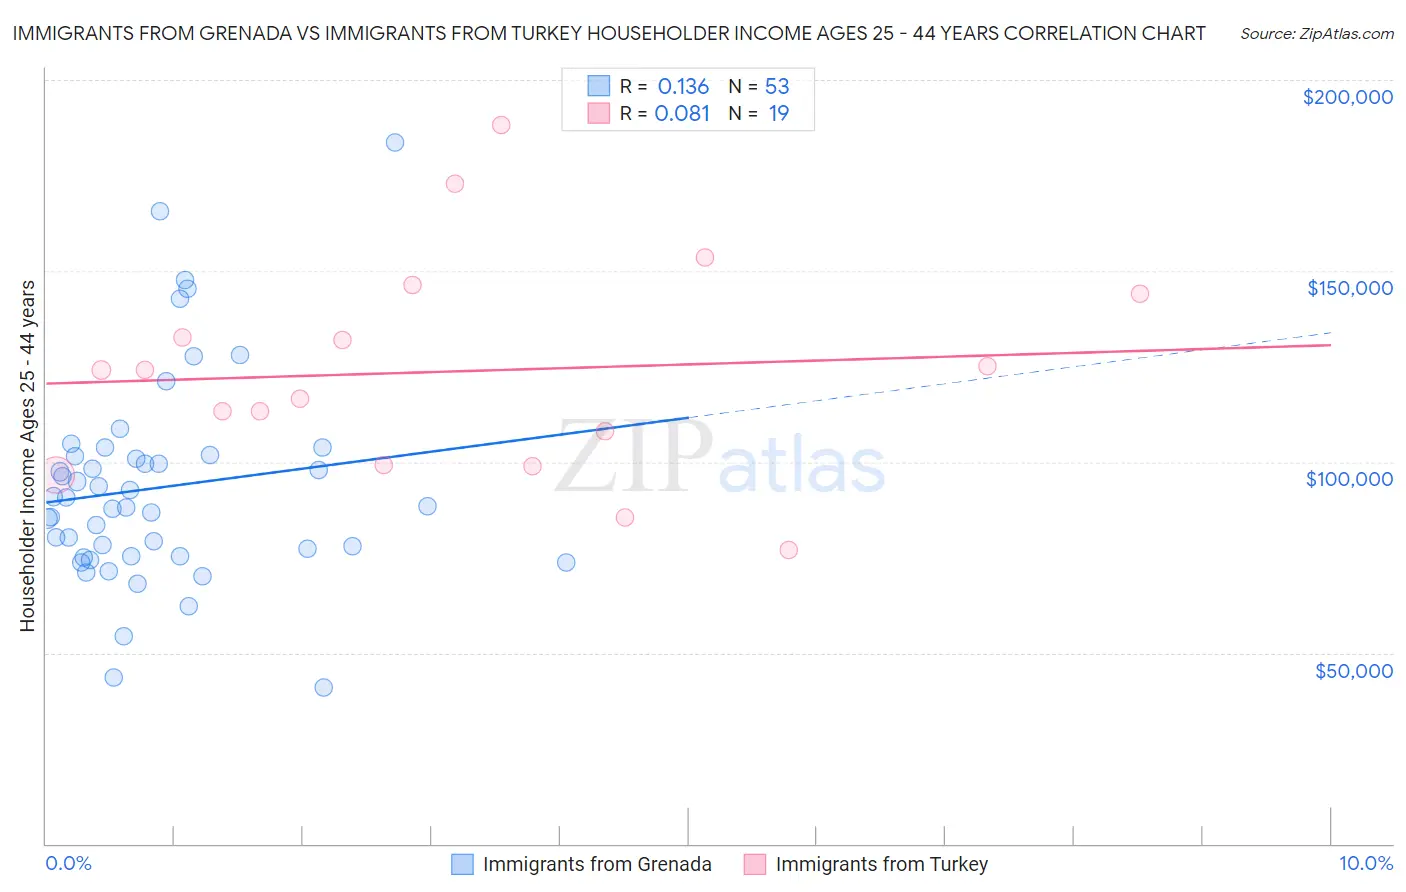 Immigrants from Grenada vs Immigrants from Turkey Householder Income Ages 25 - 44 years